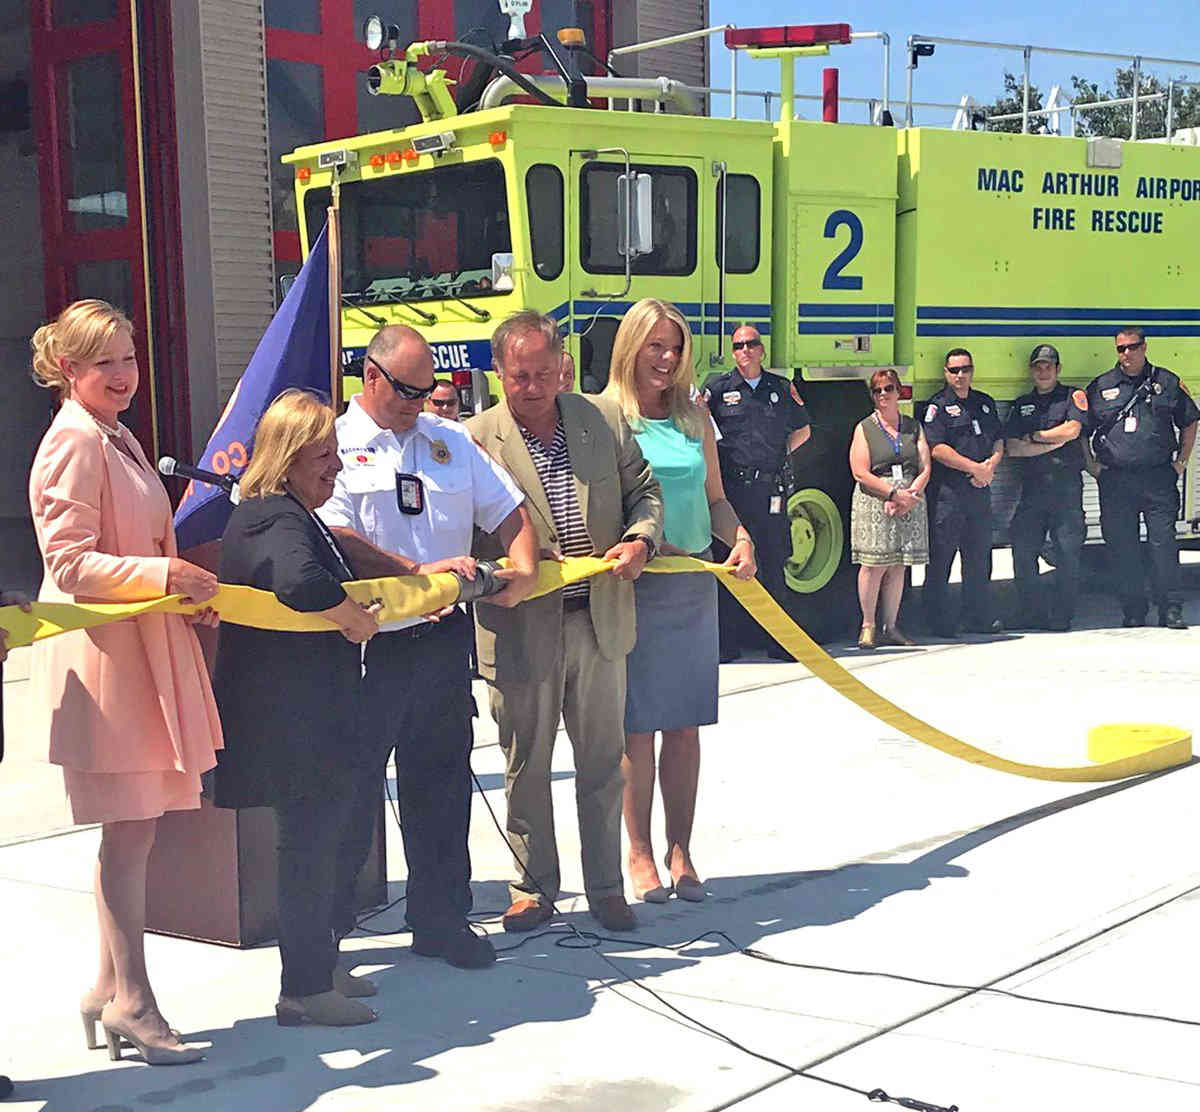 MacArthur Airport opens new fire rescue building